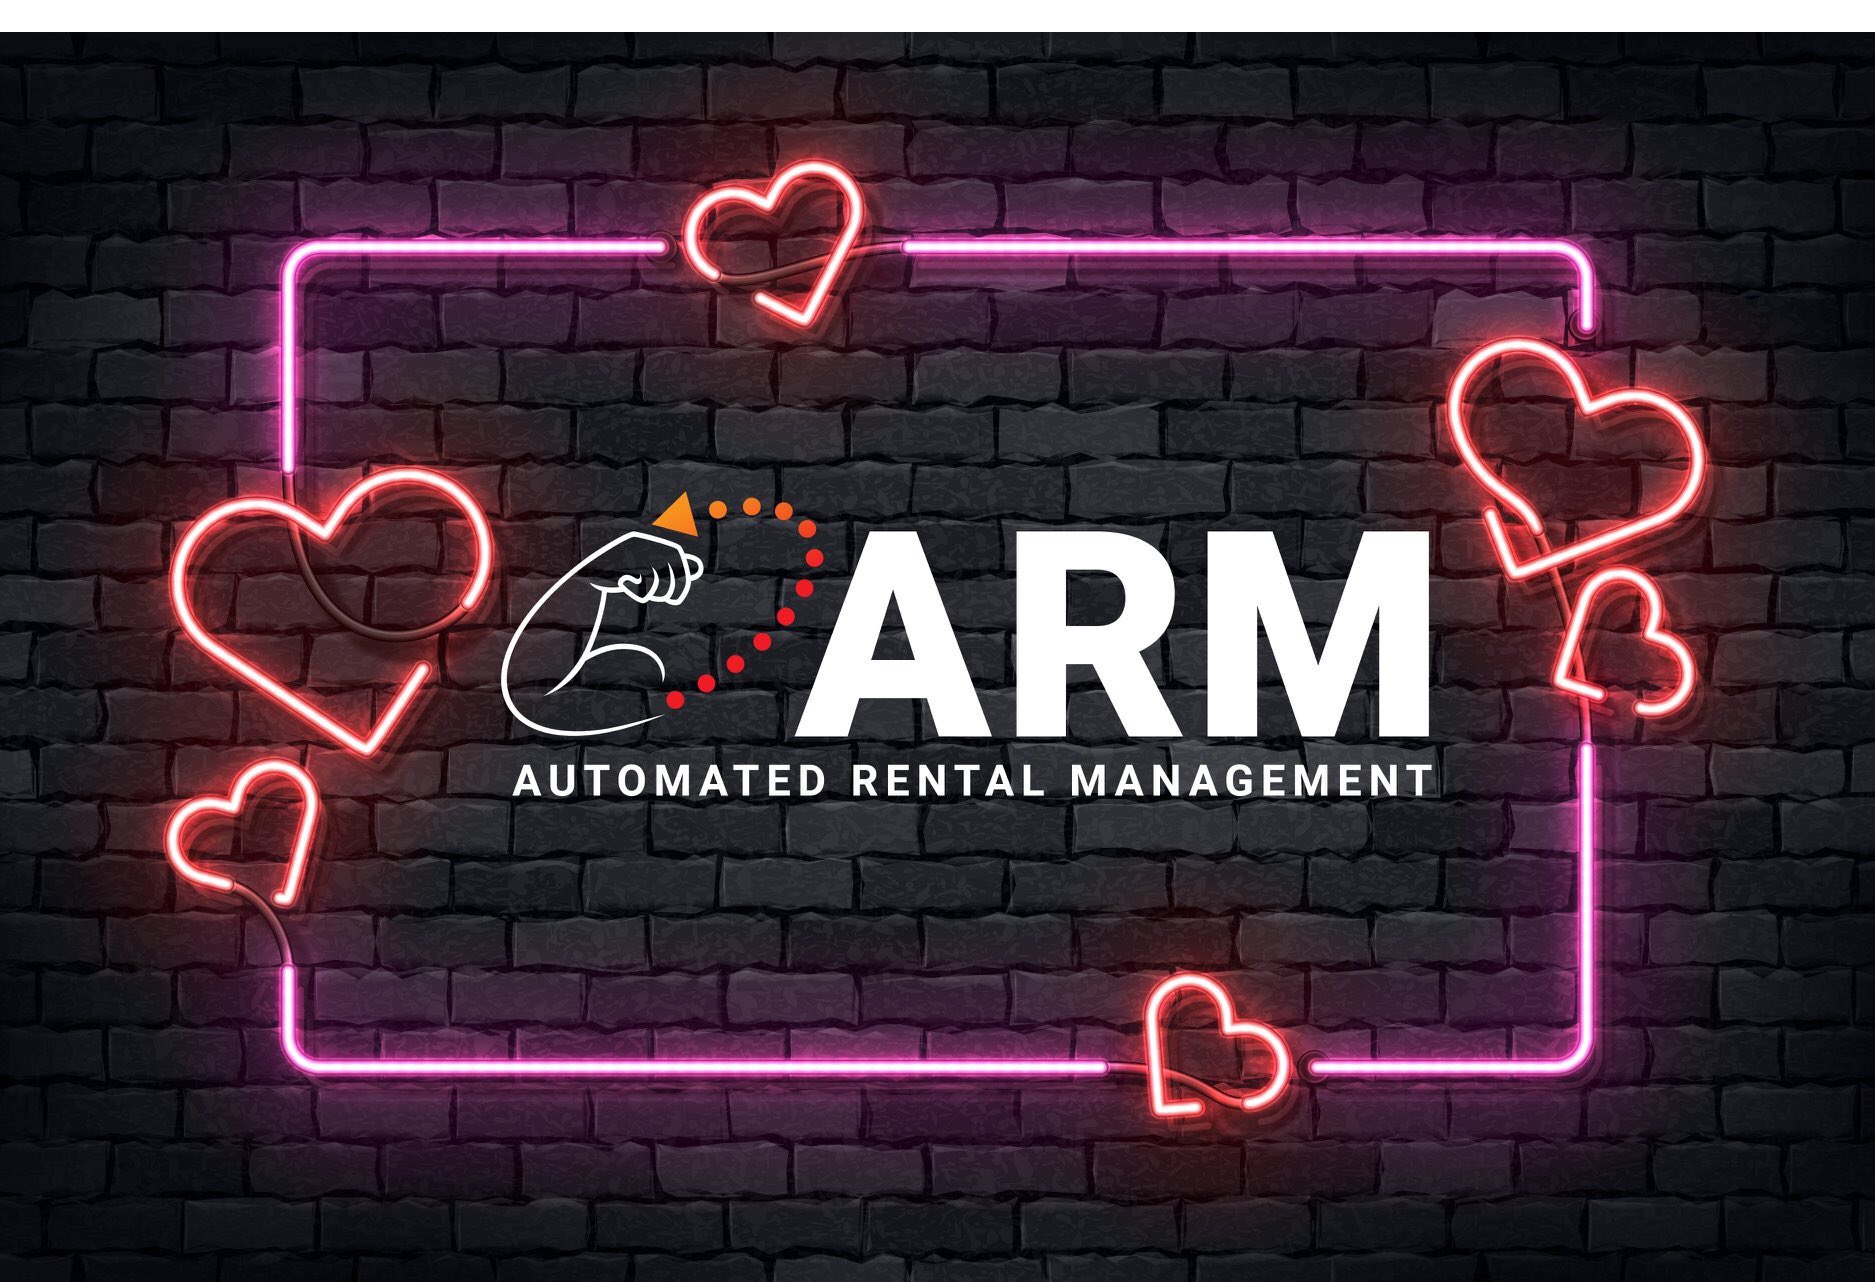 Automated Rental Management